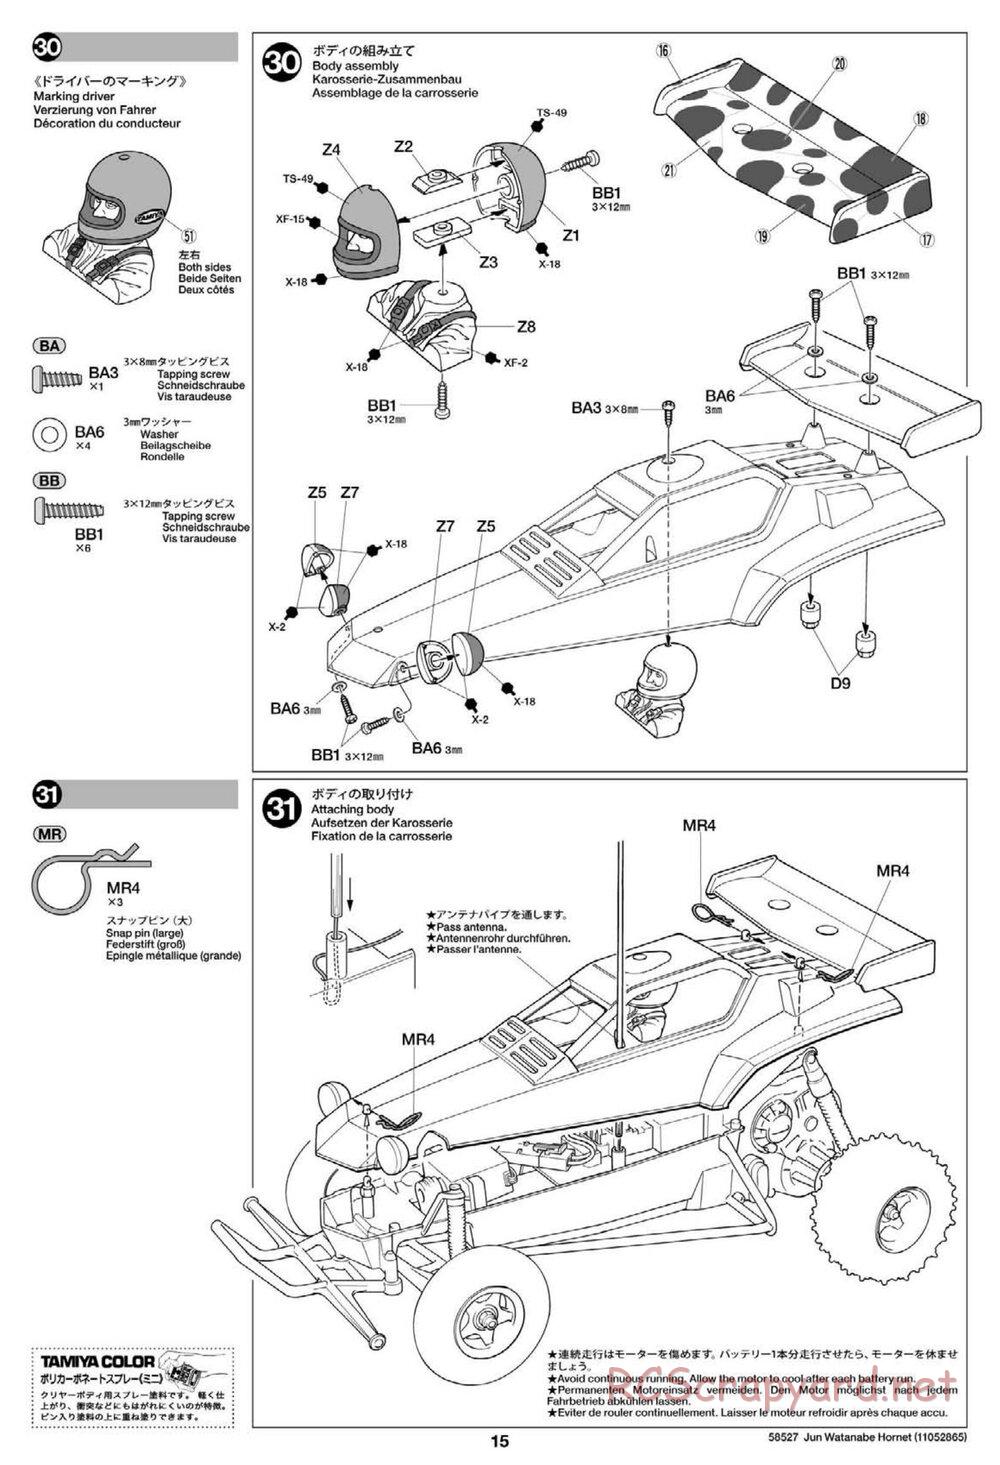 Tamiya - The Hornet by Jun Watanabe - GH Chassis - Manual - Page 15